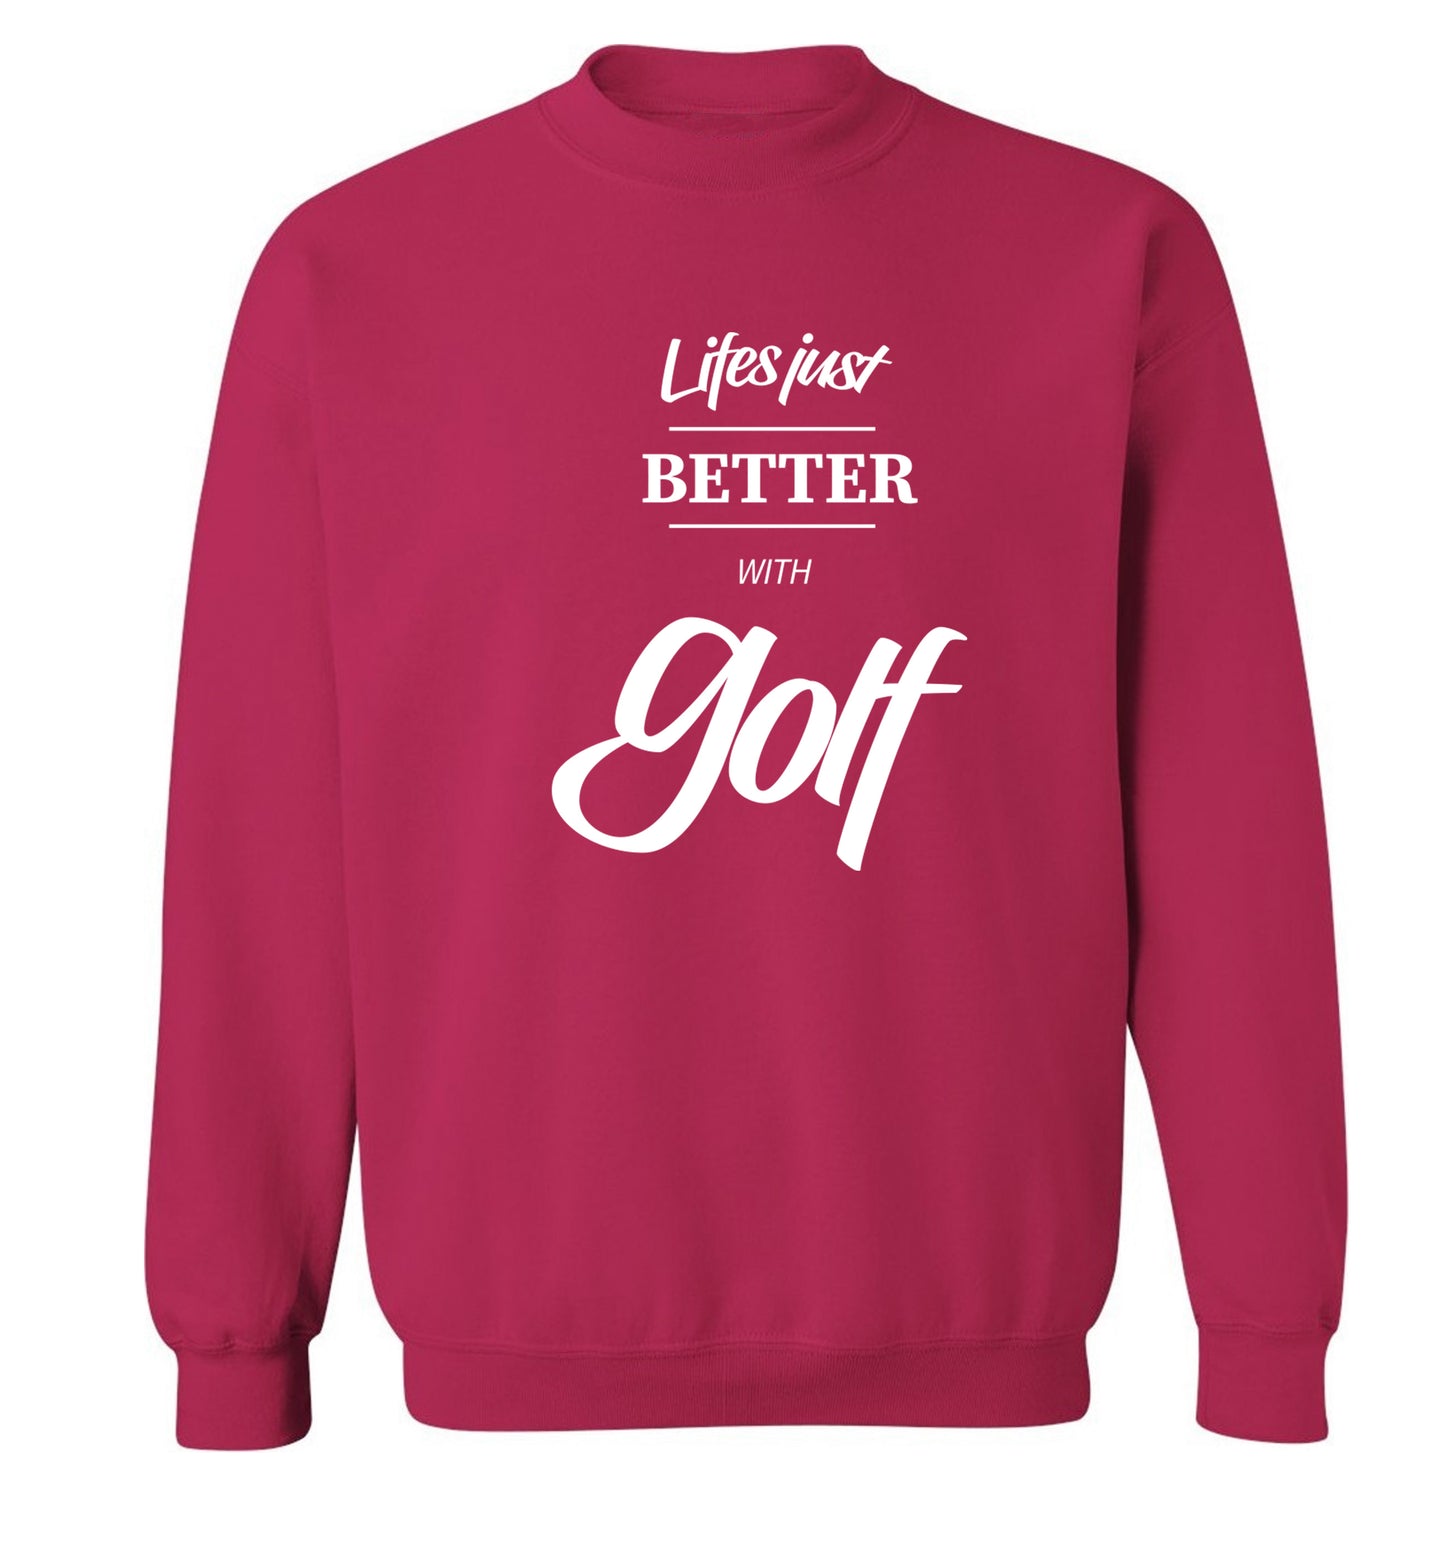 Life is better with golf Adult's unisex pink Sweater 2XL